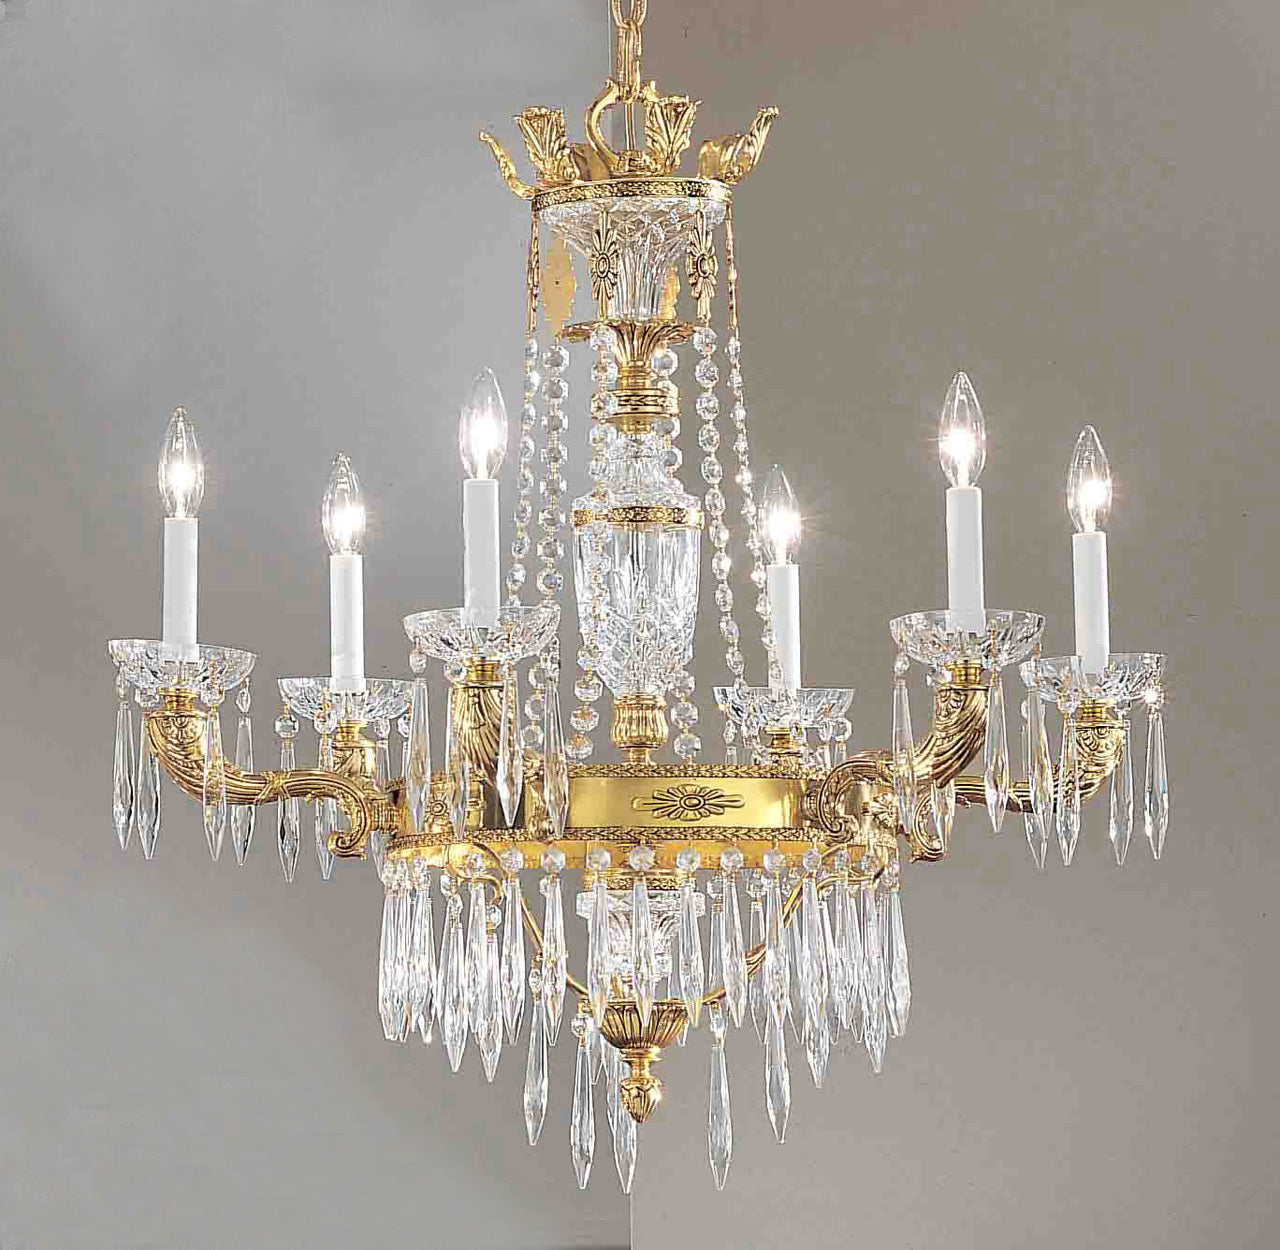 Classic Lighting 57315 AGB AI Duchess Crystal Chandelier in Aged Bronze (Imported from Spain)